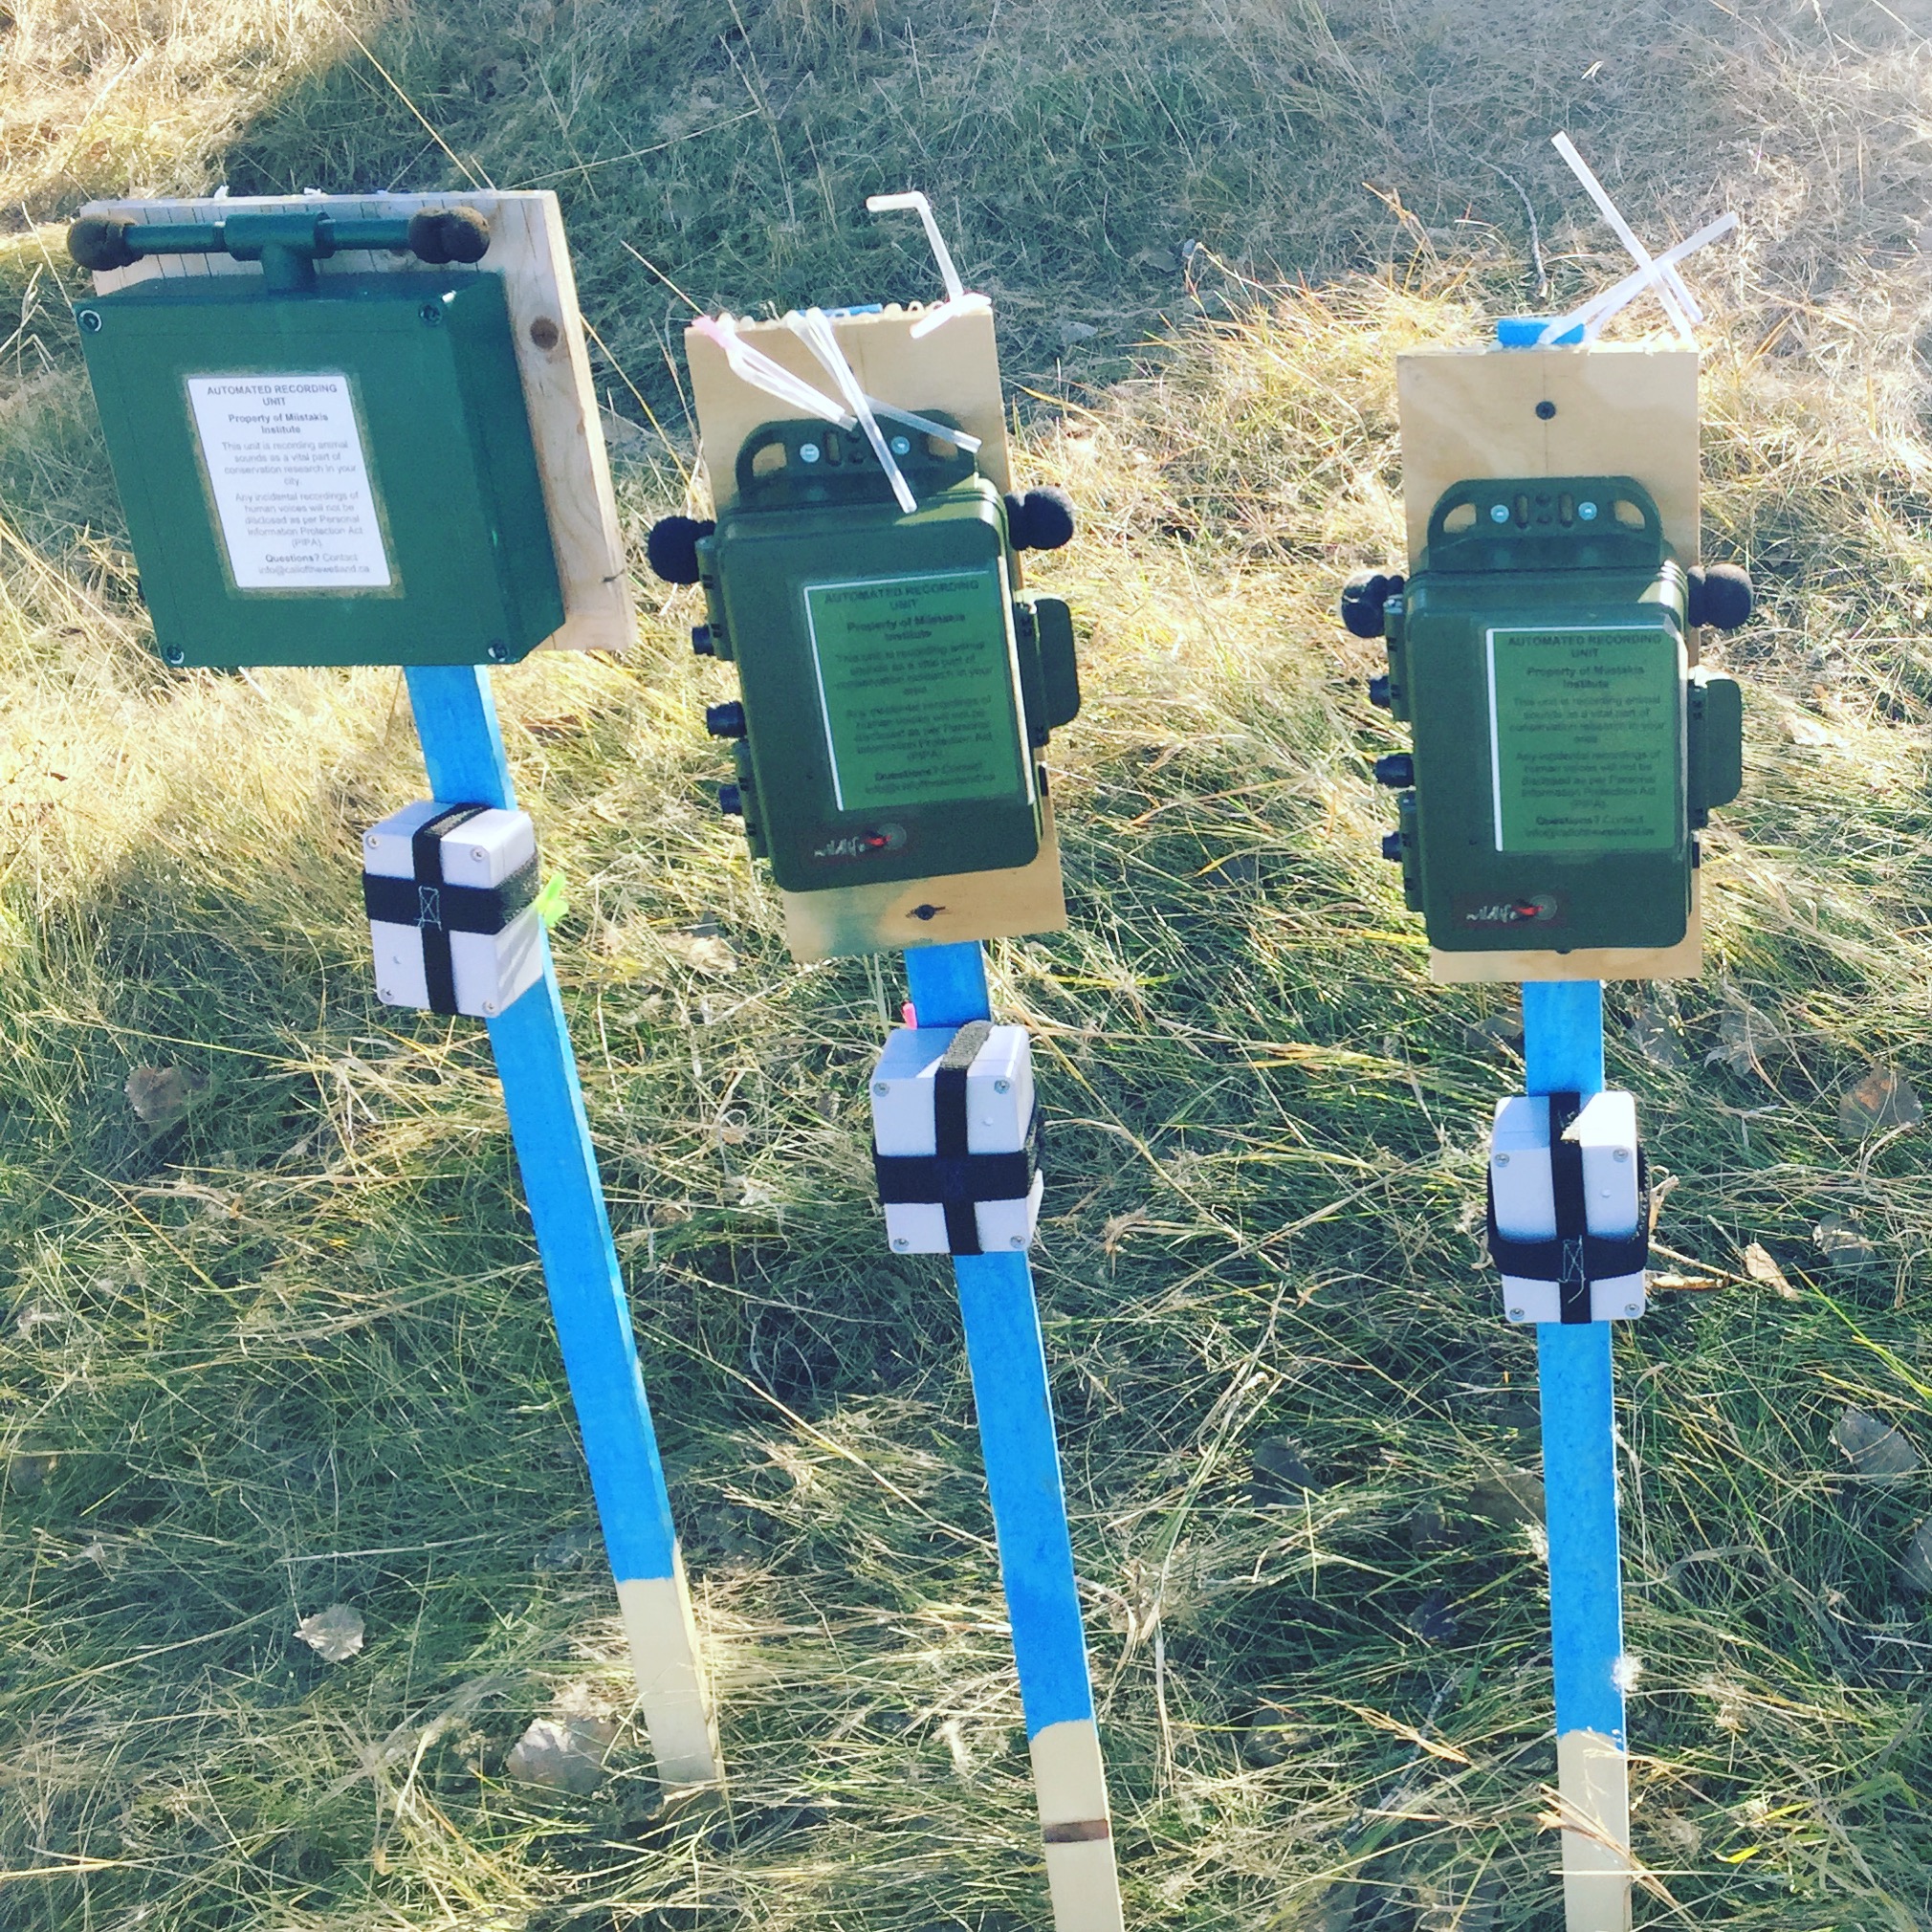 Audio recording equipment on three bright blue stakes in a grassy field.